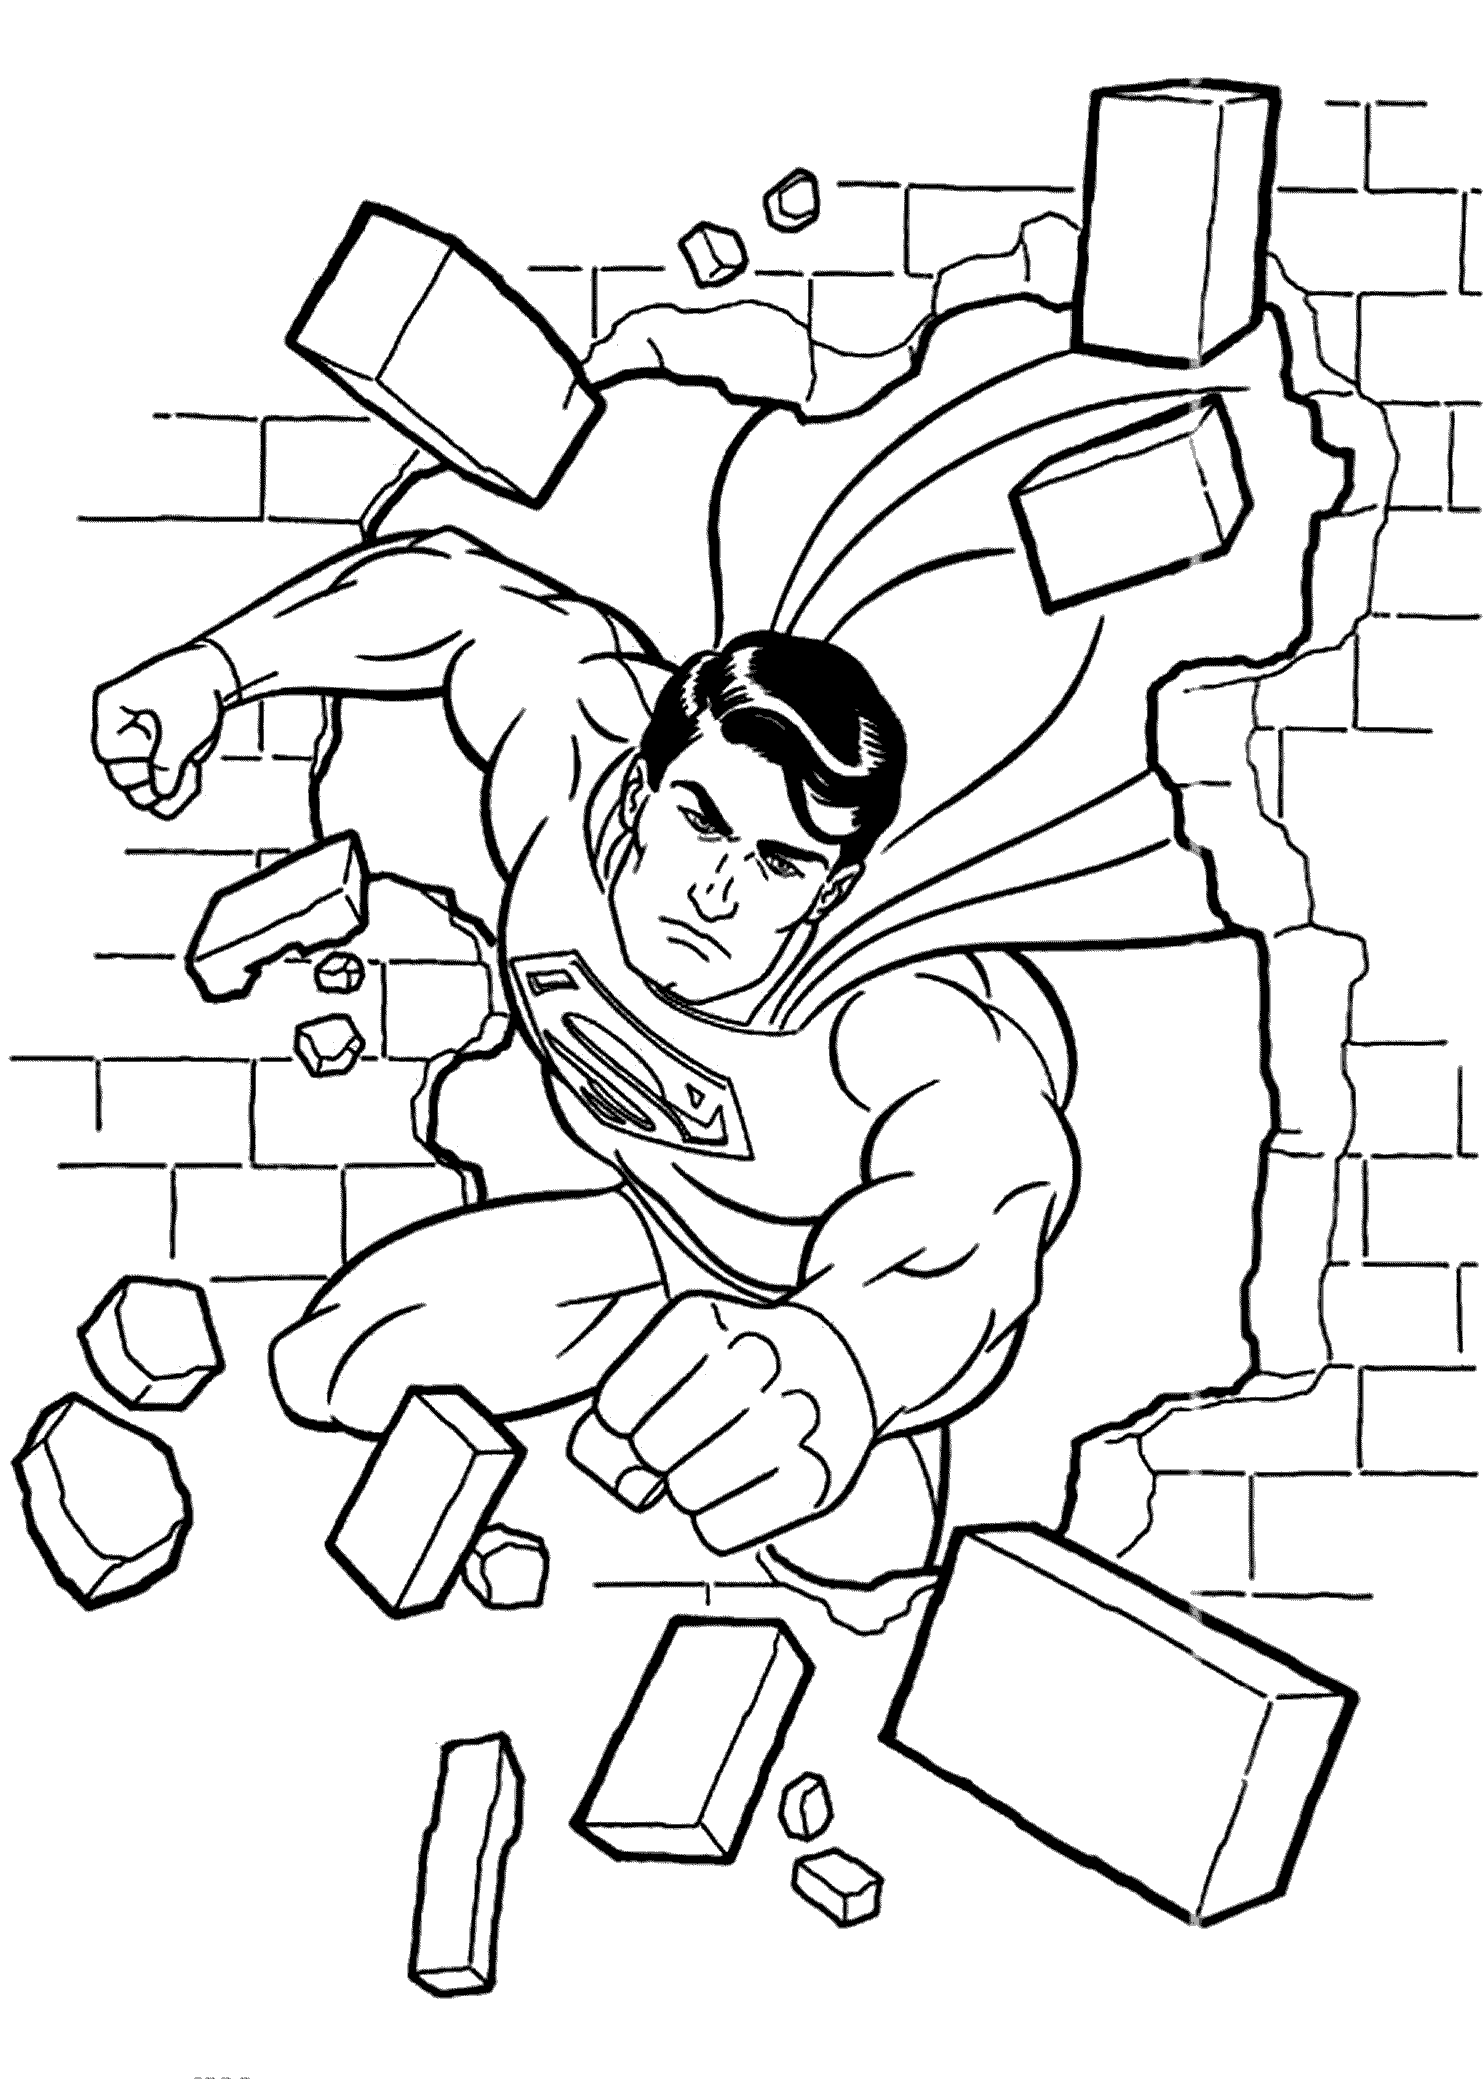 Anime Manga Coloring Pages Superman | Coloring Pages For All Ages